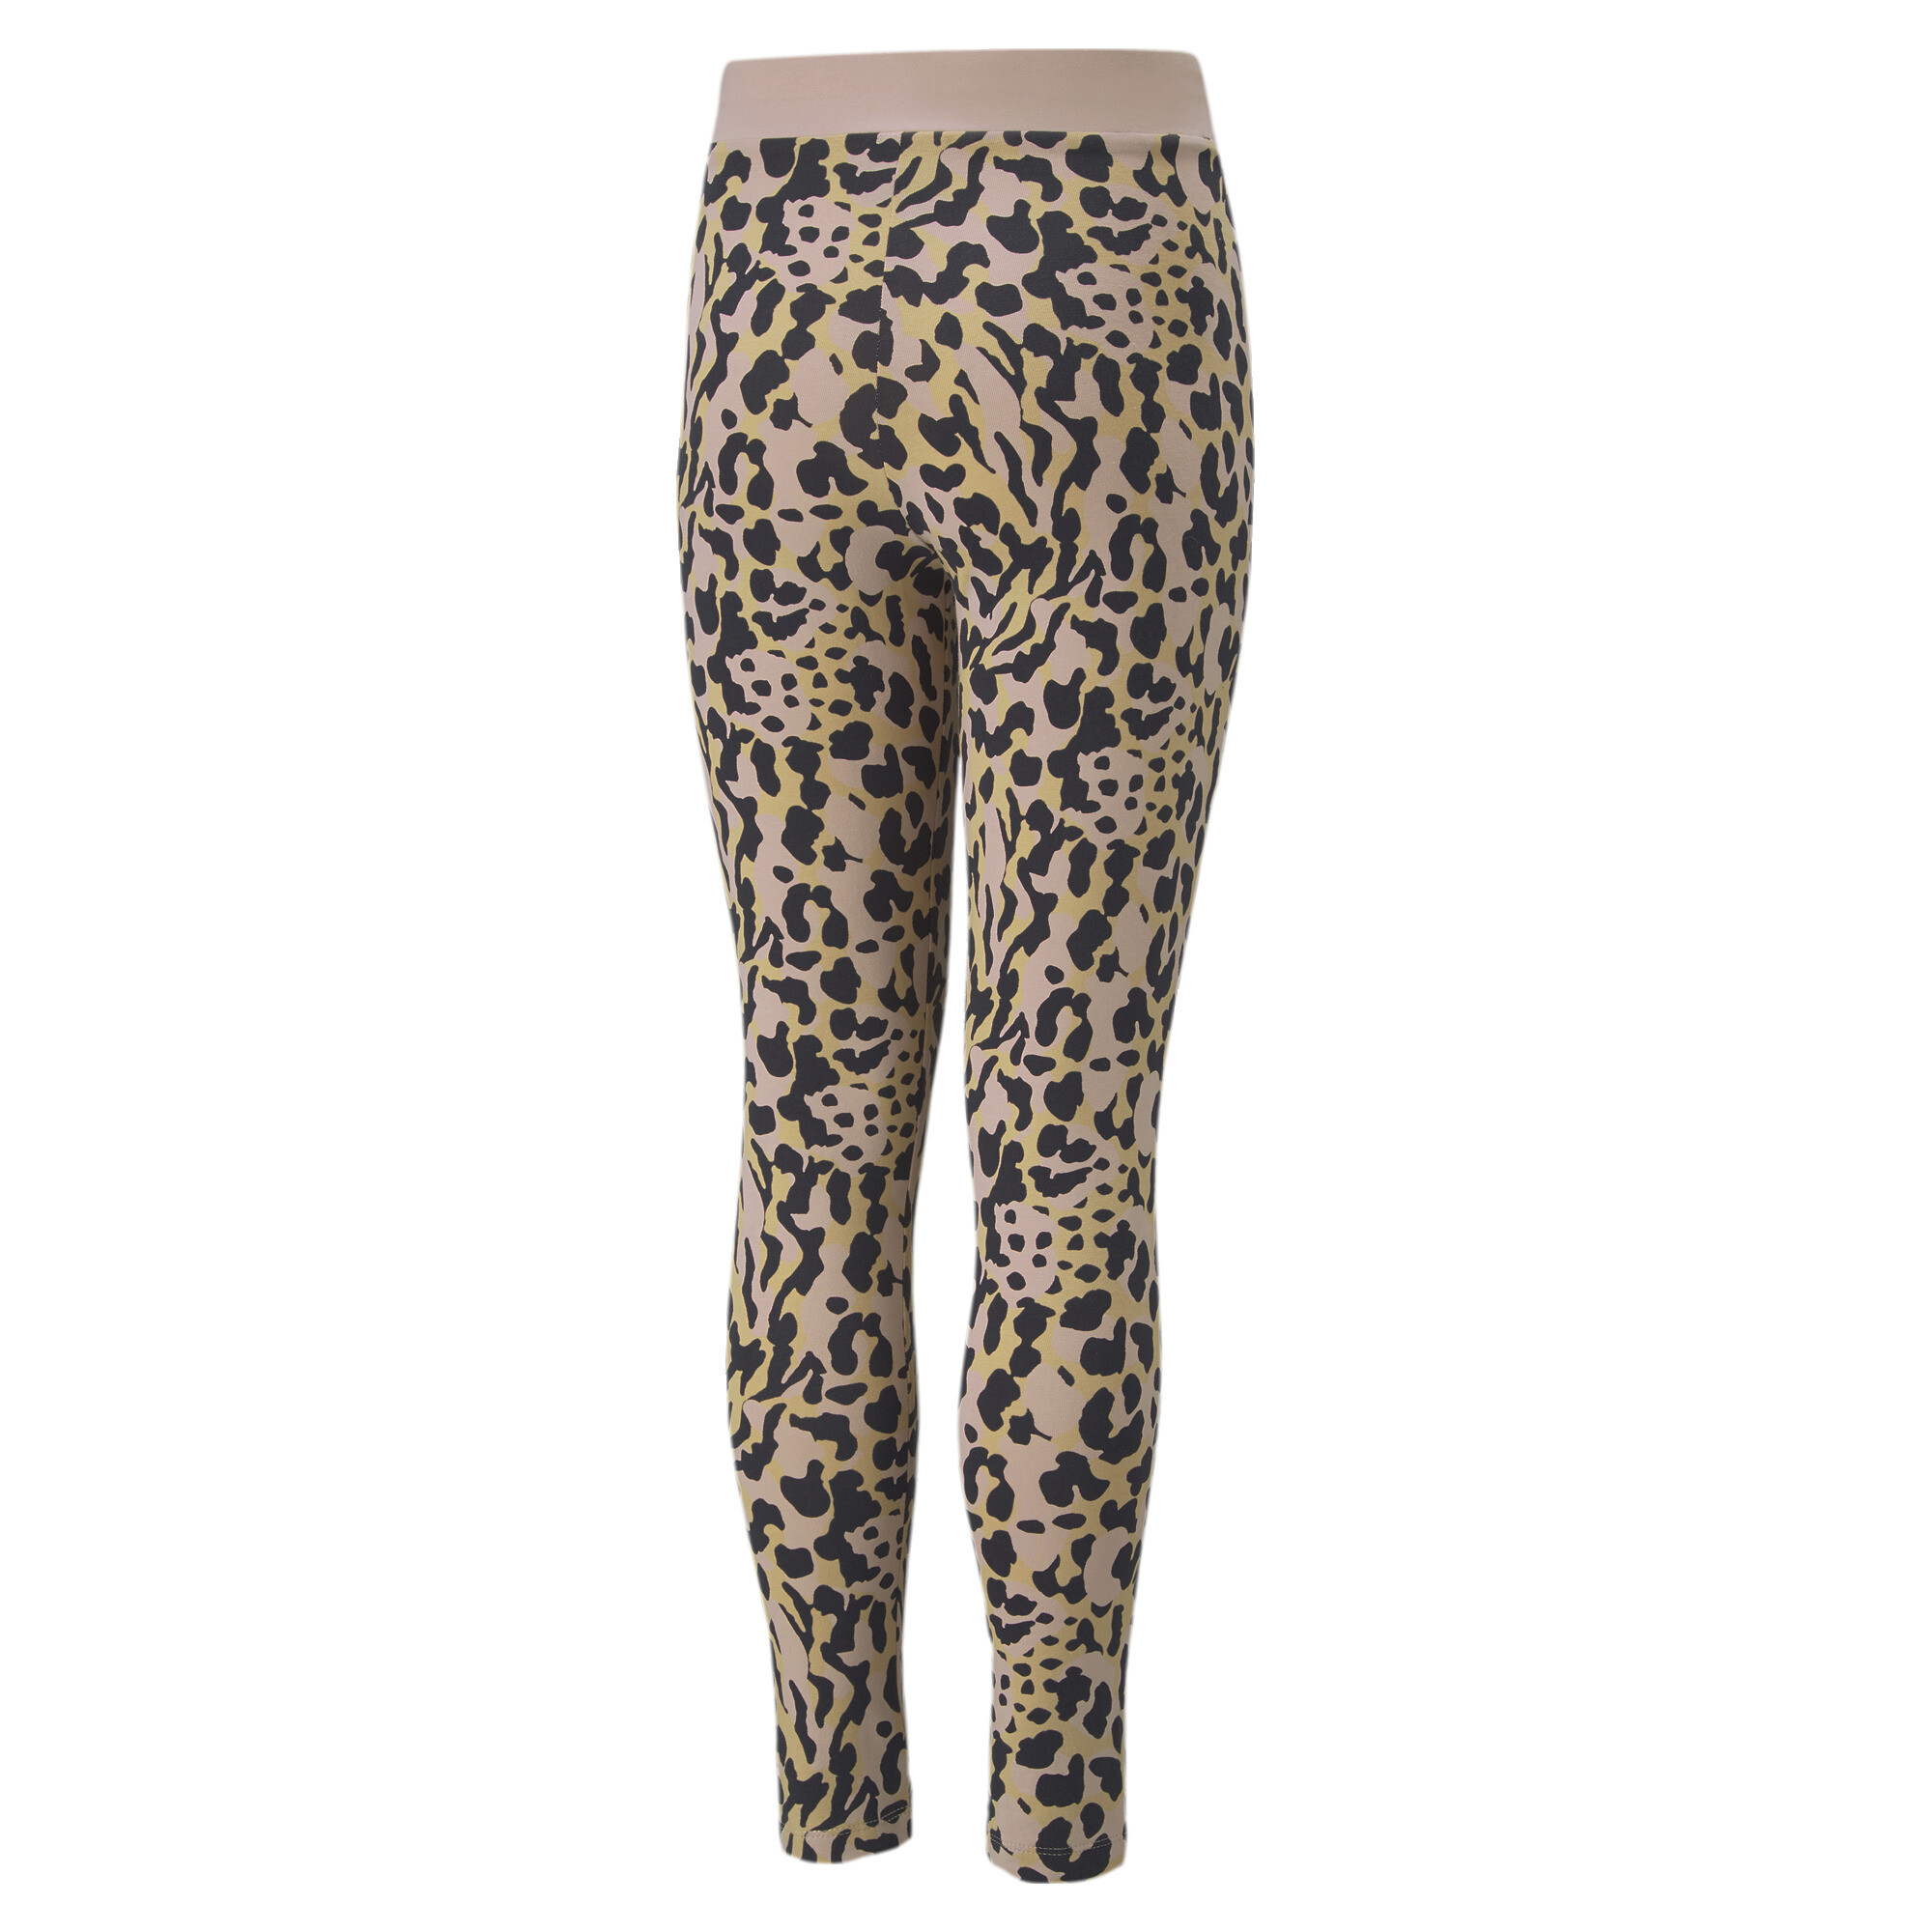 PUMA Alpha Printed Leggings In Pink, Size 7-8 Youth